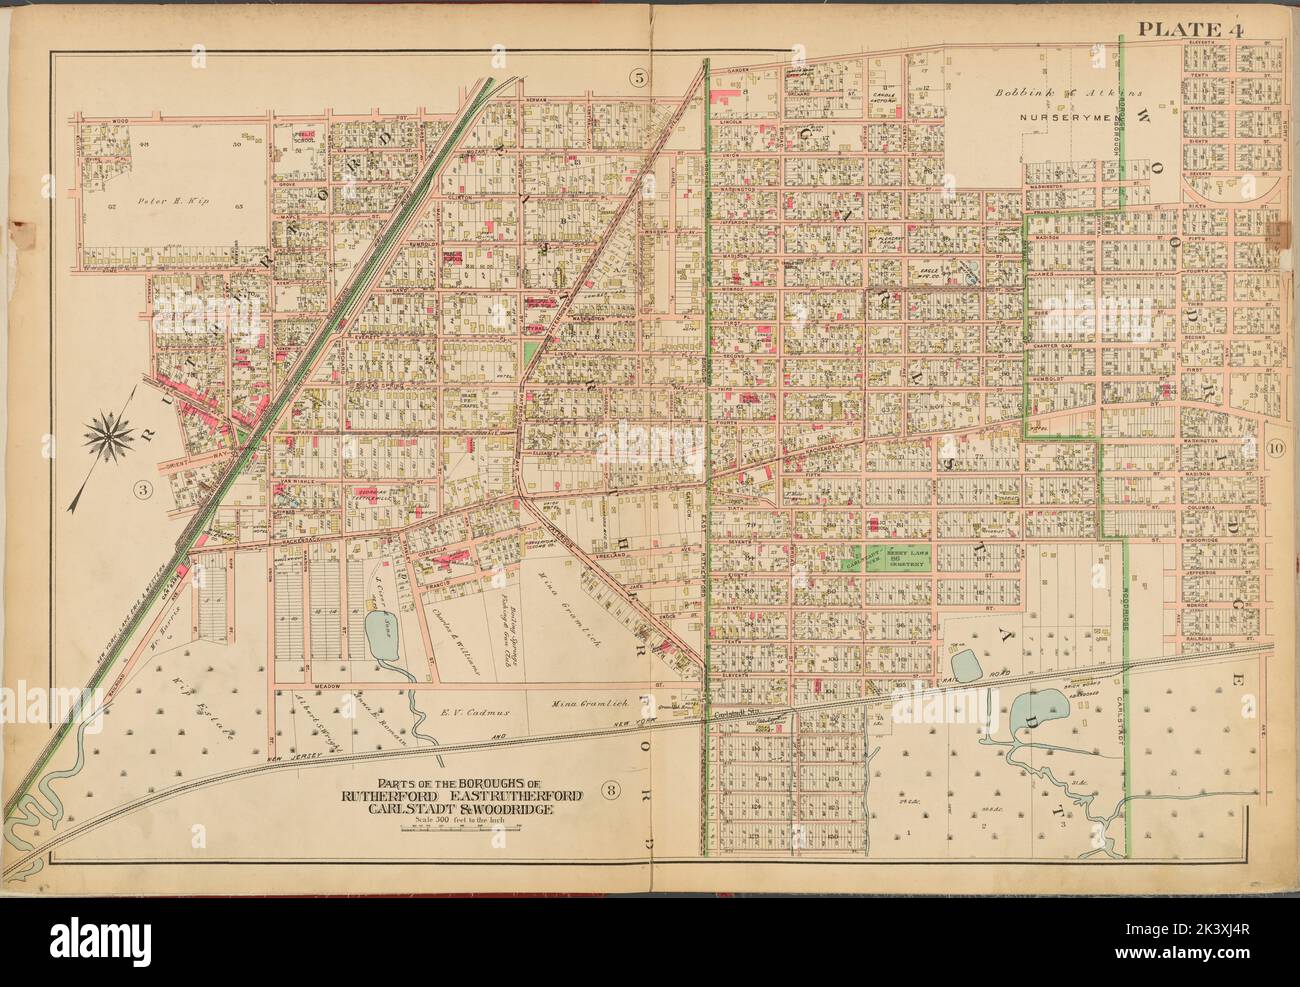 Bergen County, V. 2, Double Page Plate No. 4 Map bounded by Wood St., Herman St., Garden St., 11th St., North Ave., Anderson Ave., 17th St., Elliott Pl. Cartographic. Atlases, Maps. 1912 - 1913. Lionel Pincus and Princess Firyal Map Division. Bergen County (N.J.) Stock Photo